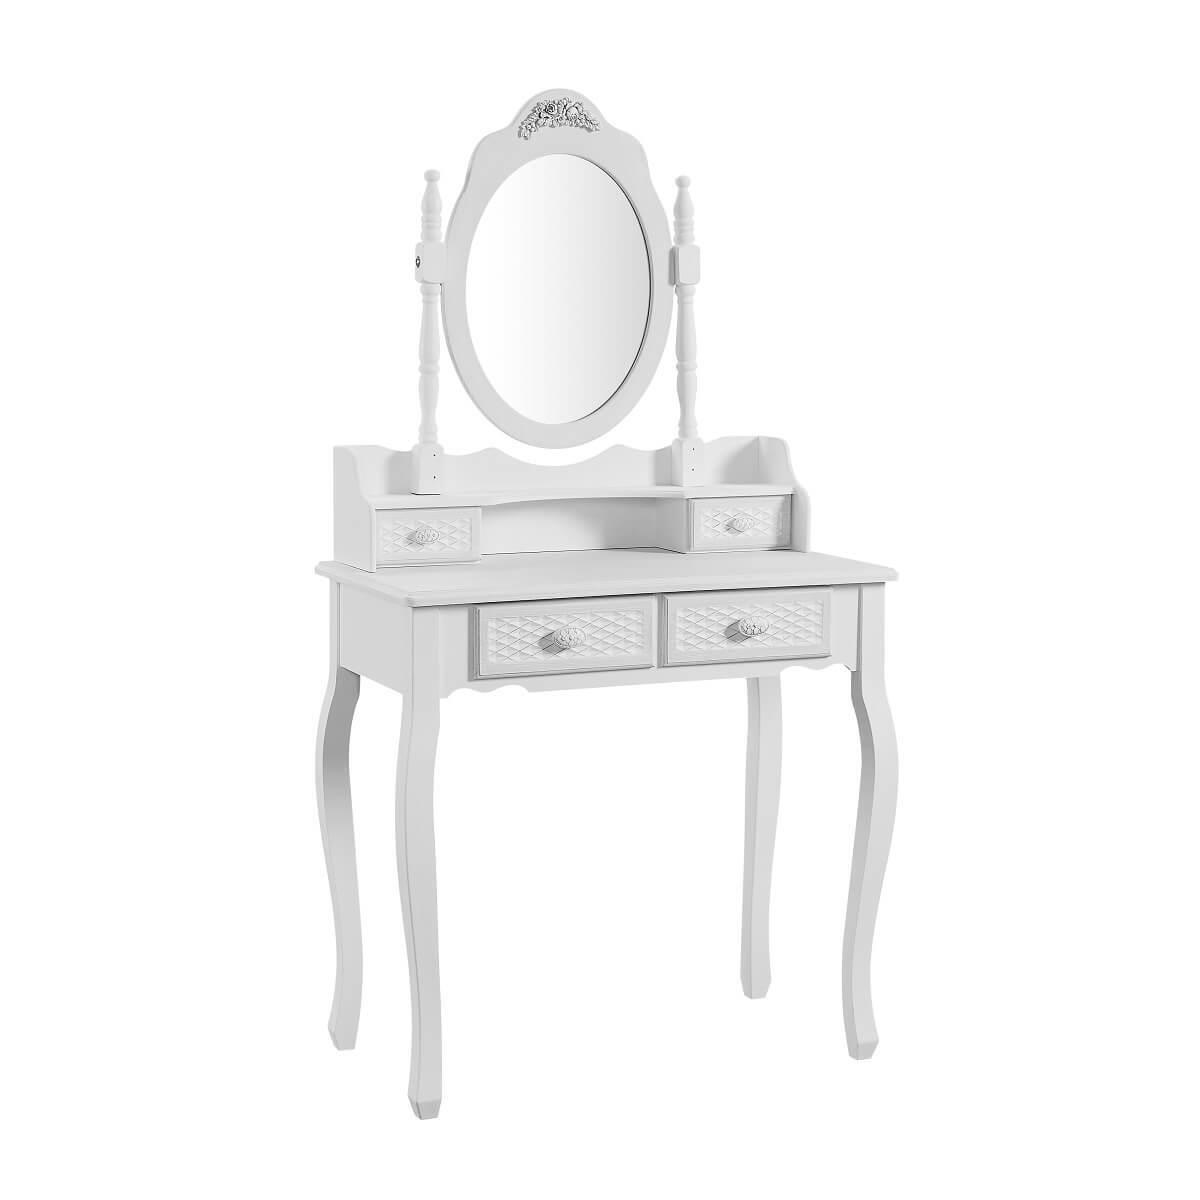 Casablanca Dressing Table and Mirror Set - image 1